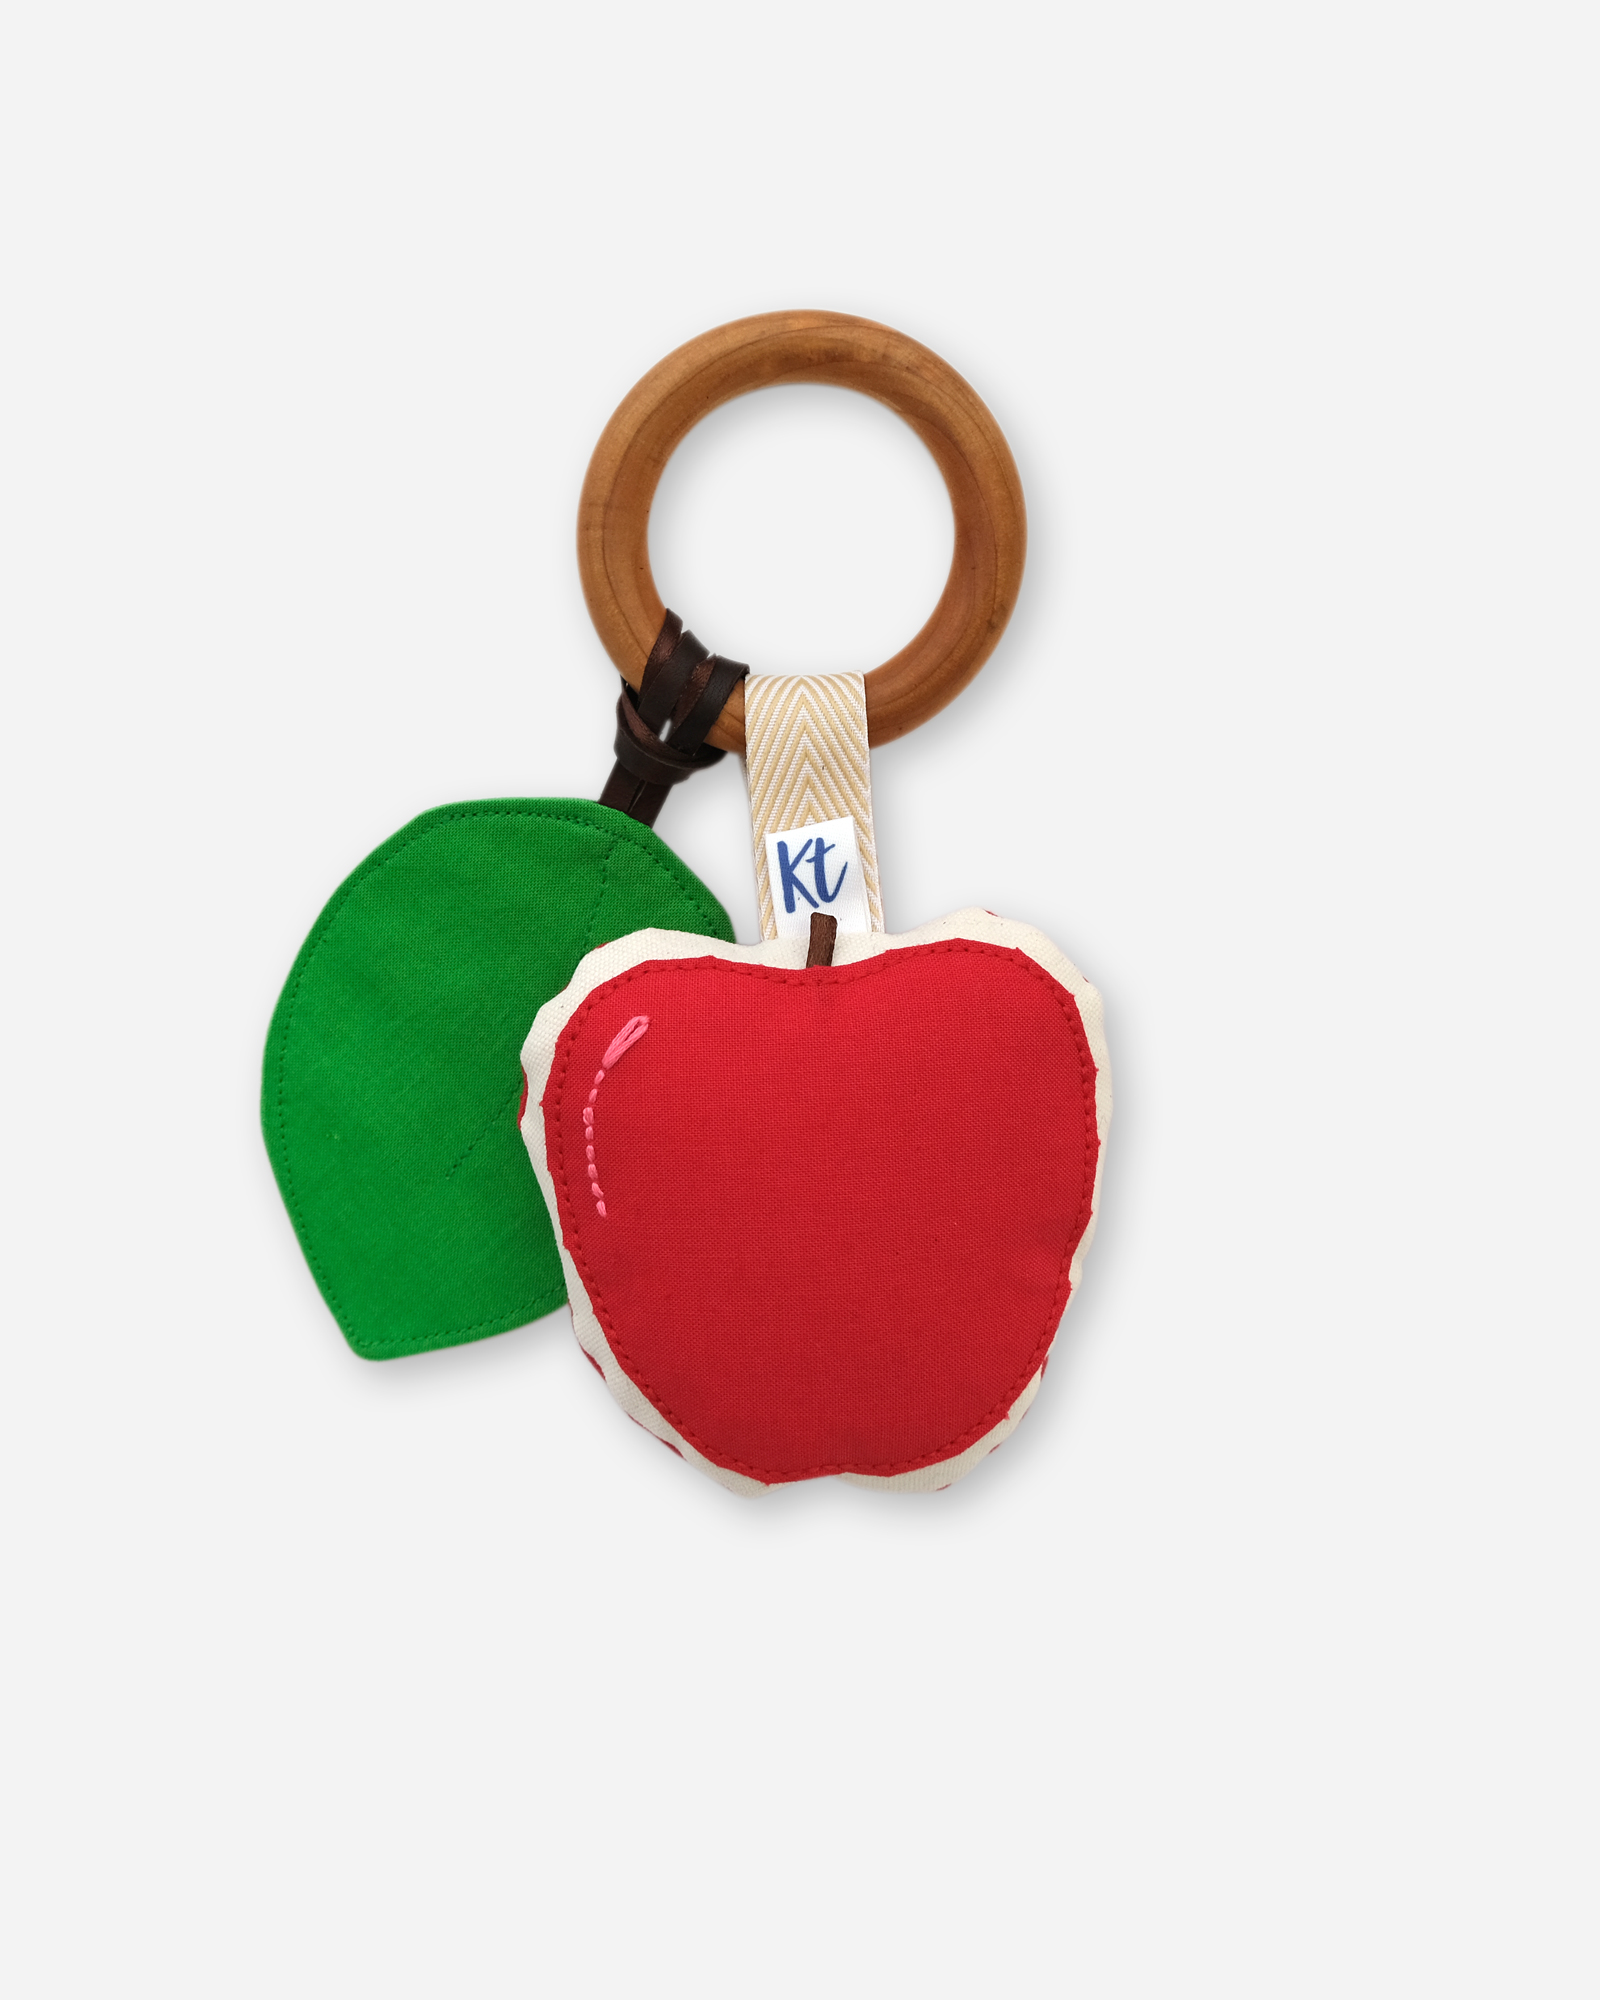 red apple teether and sensory toy